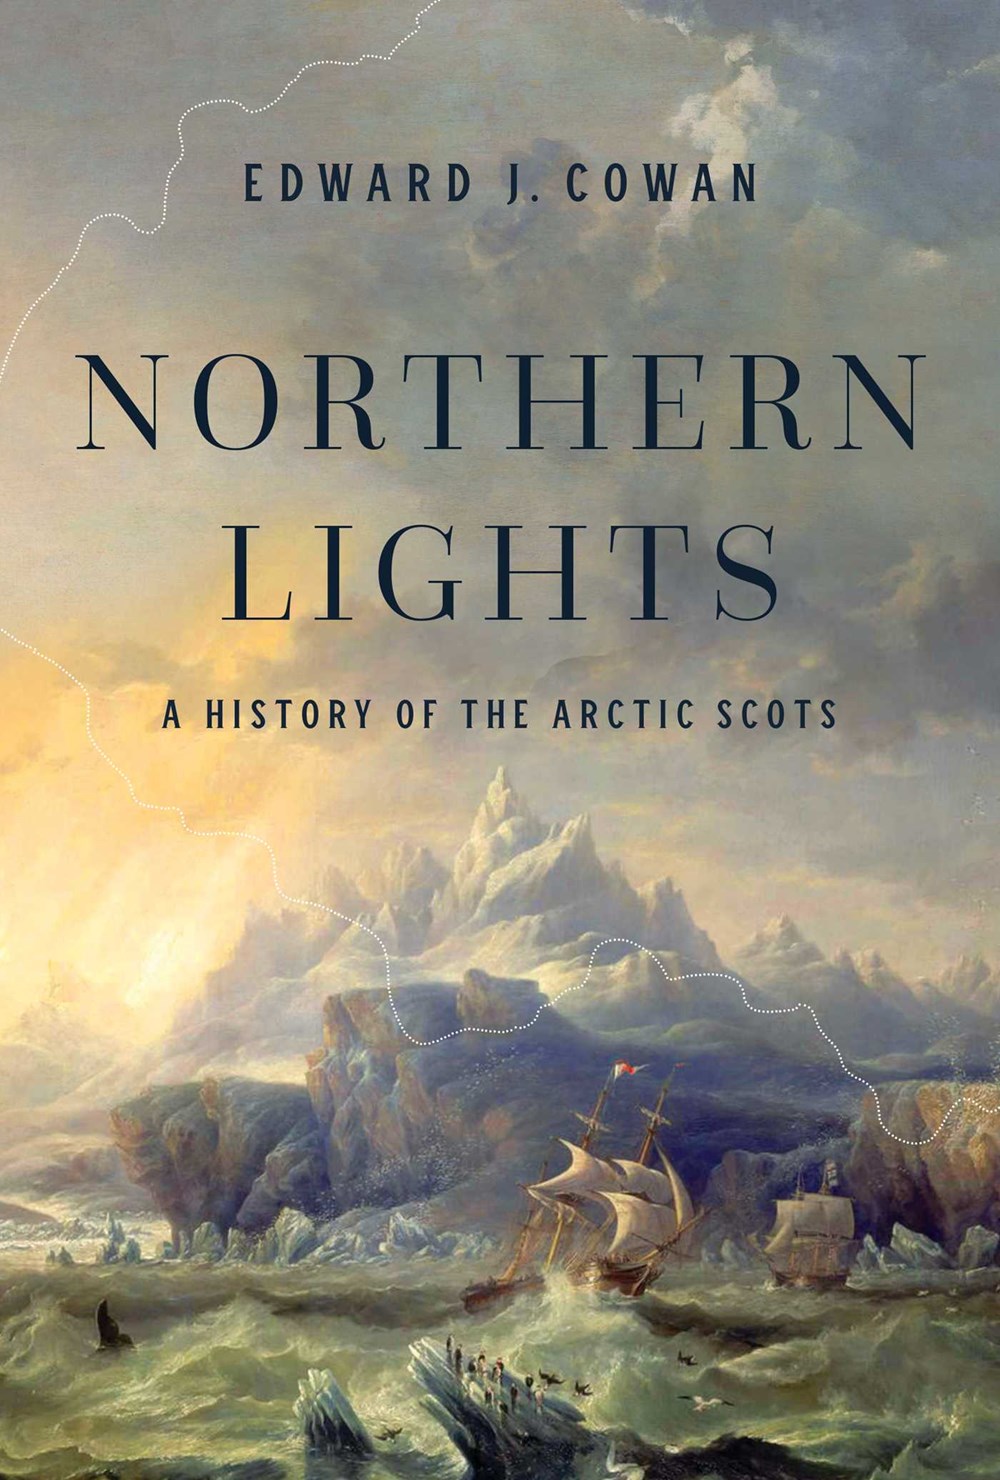 Northern Lights: A History of the Arctic Scots